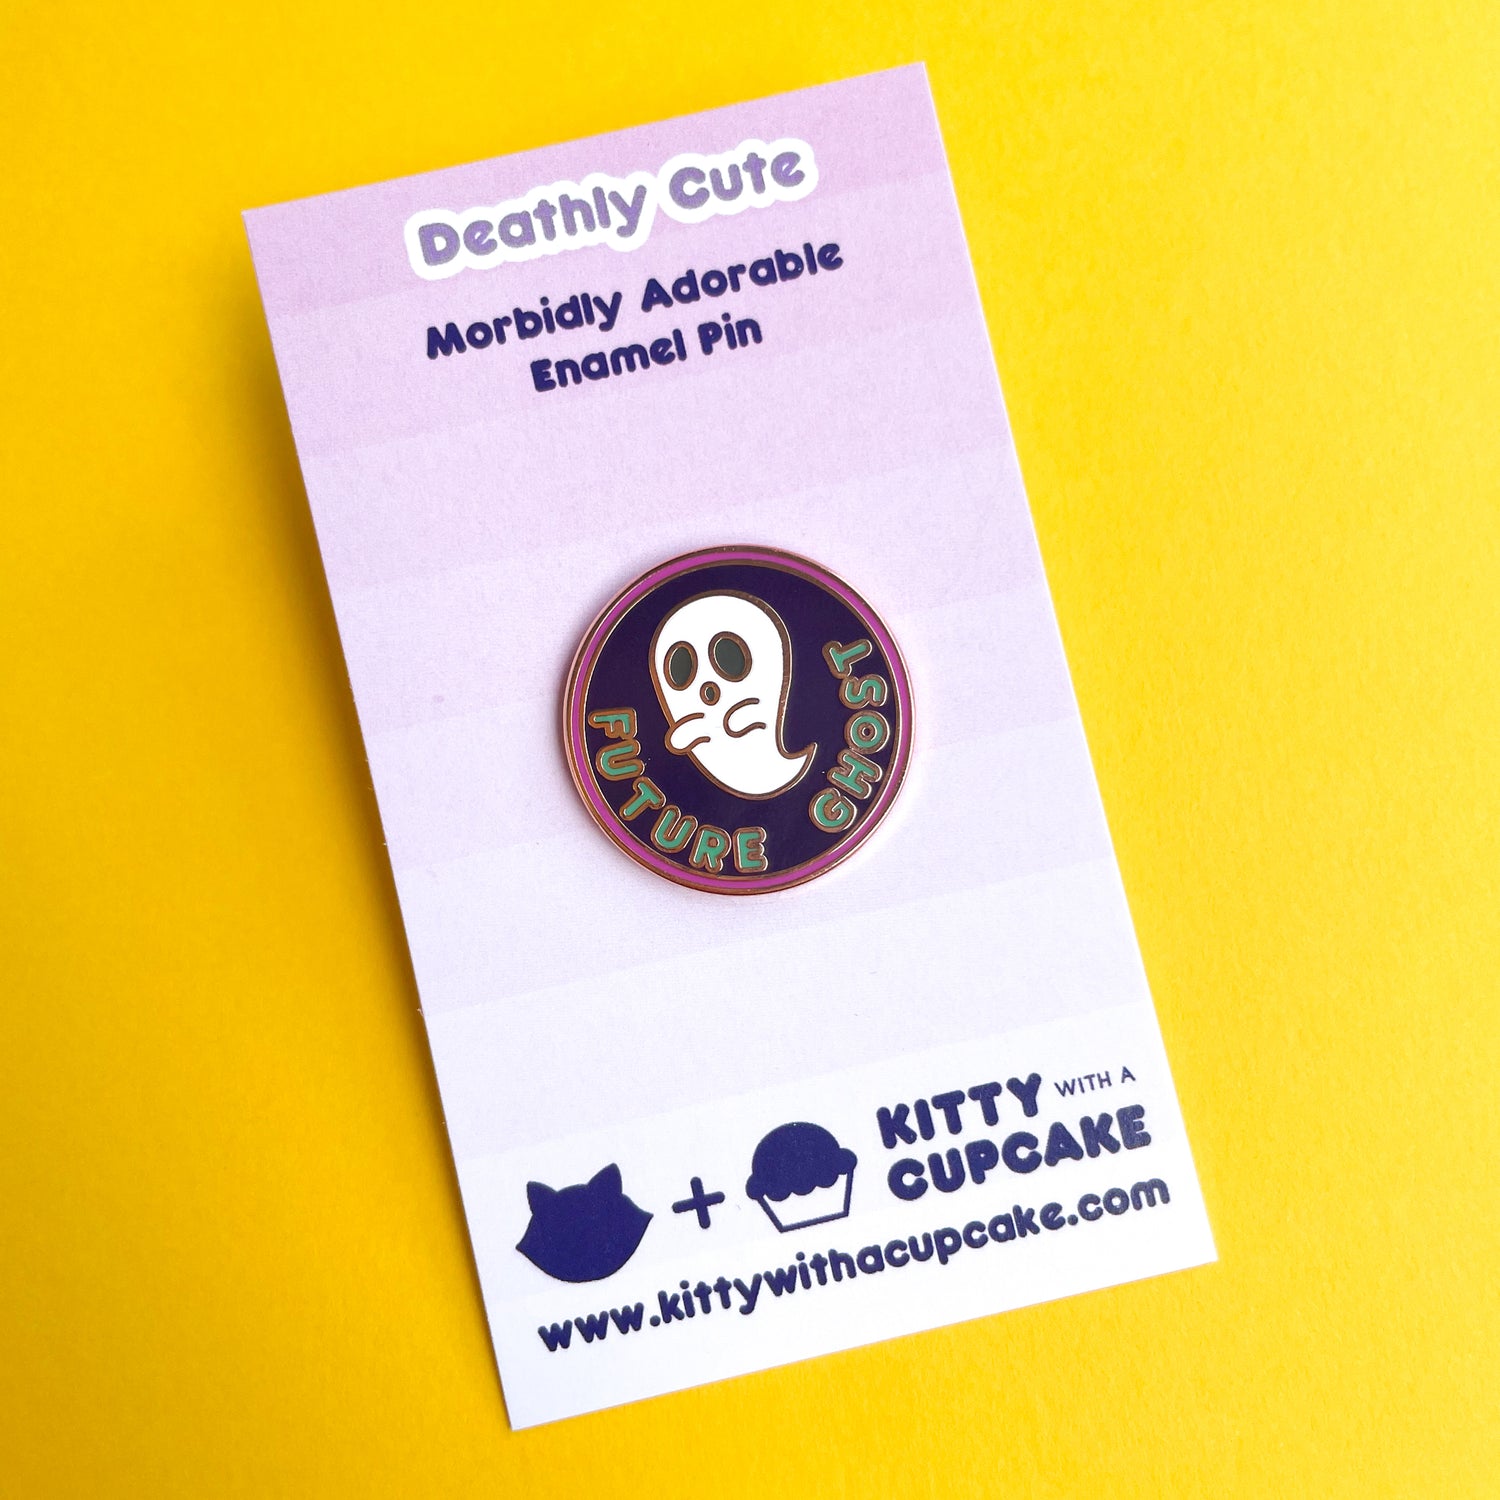 An circular enamel pin with a ghost on it that reads "Future Ghost" on a pink card.